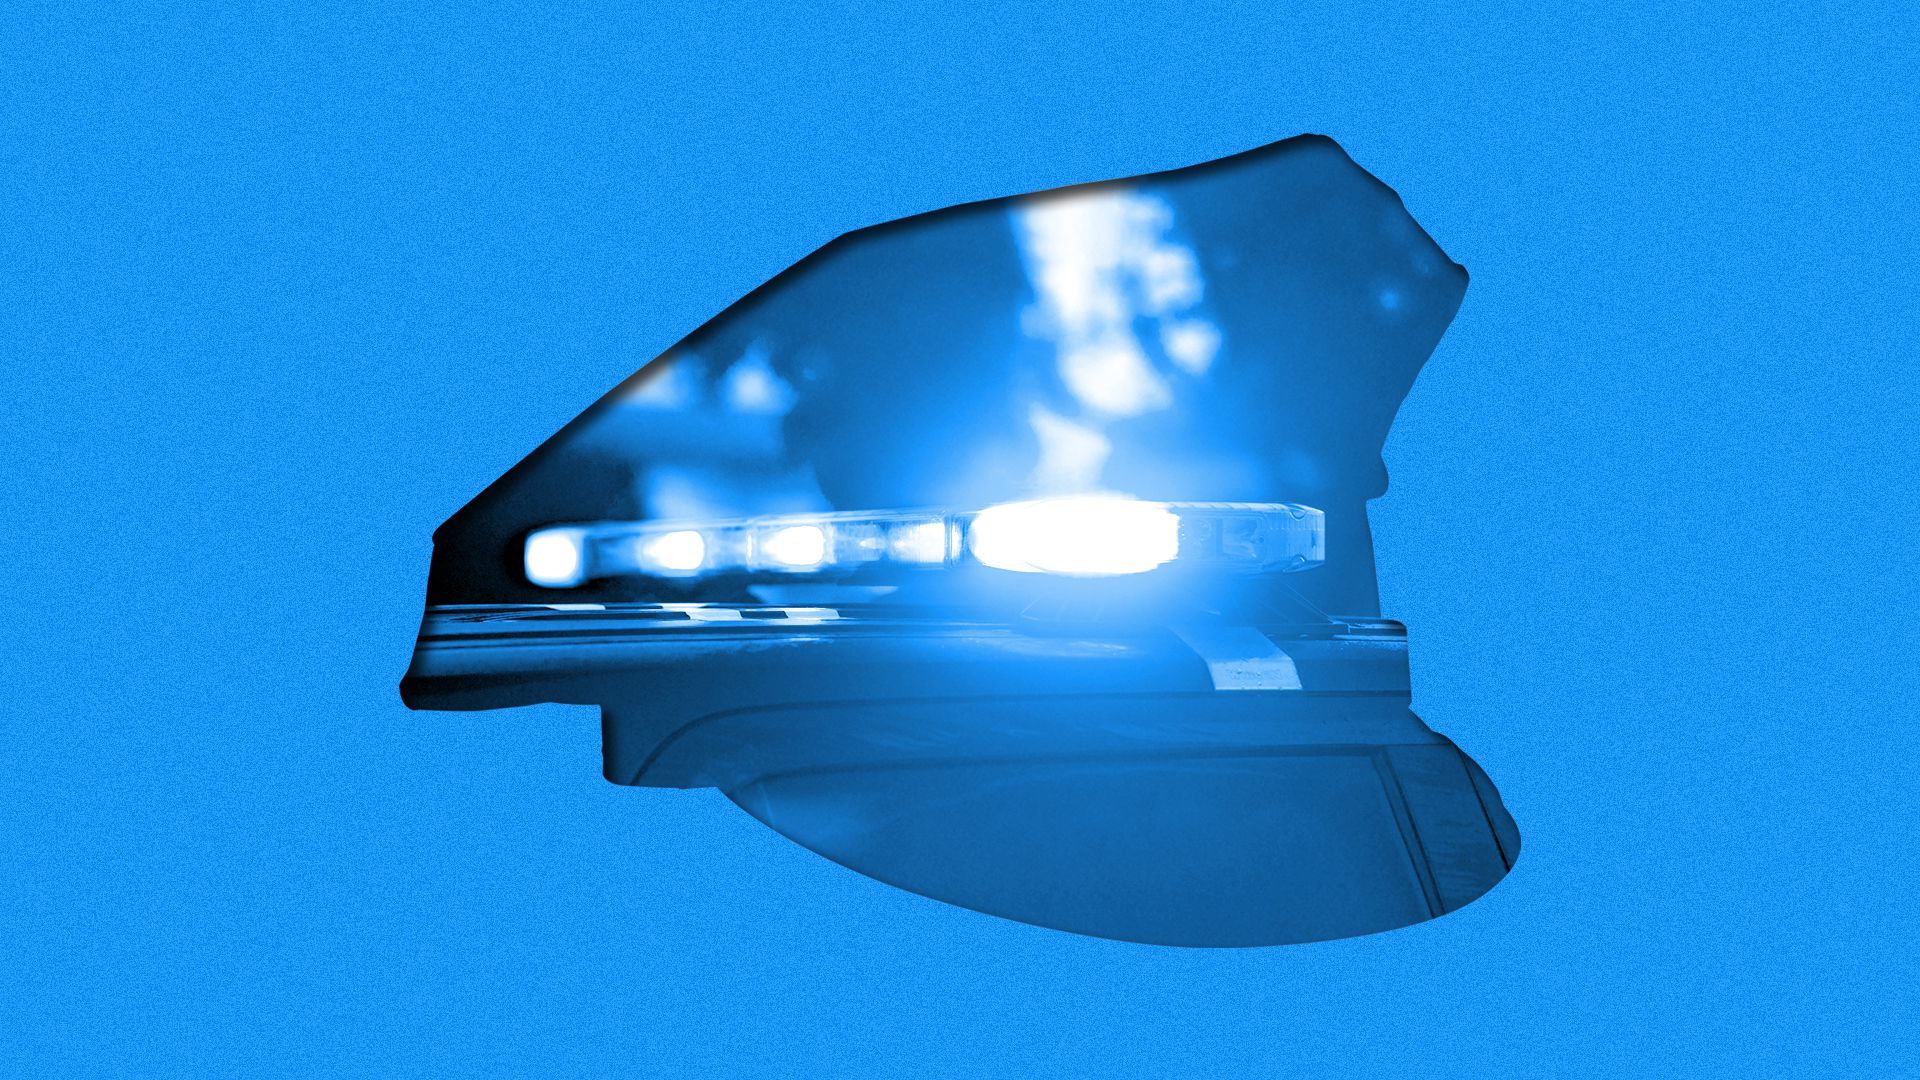 Illustration of police lights shown through the shape of a police hat.